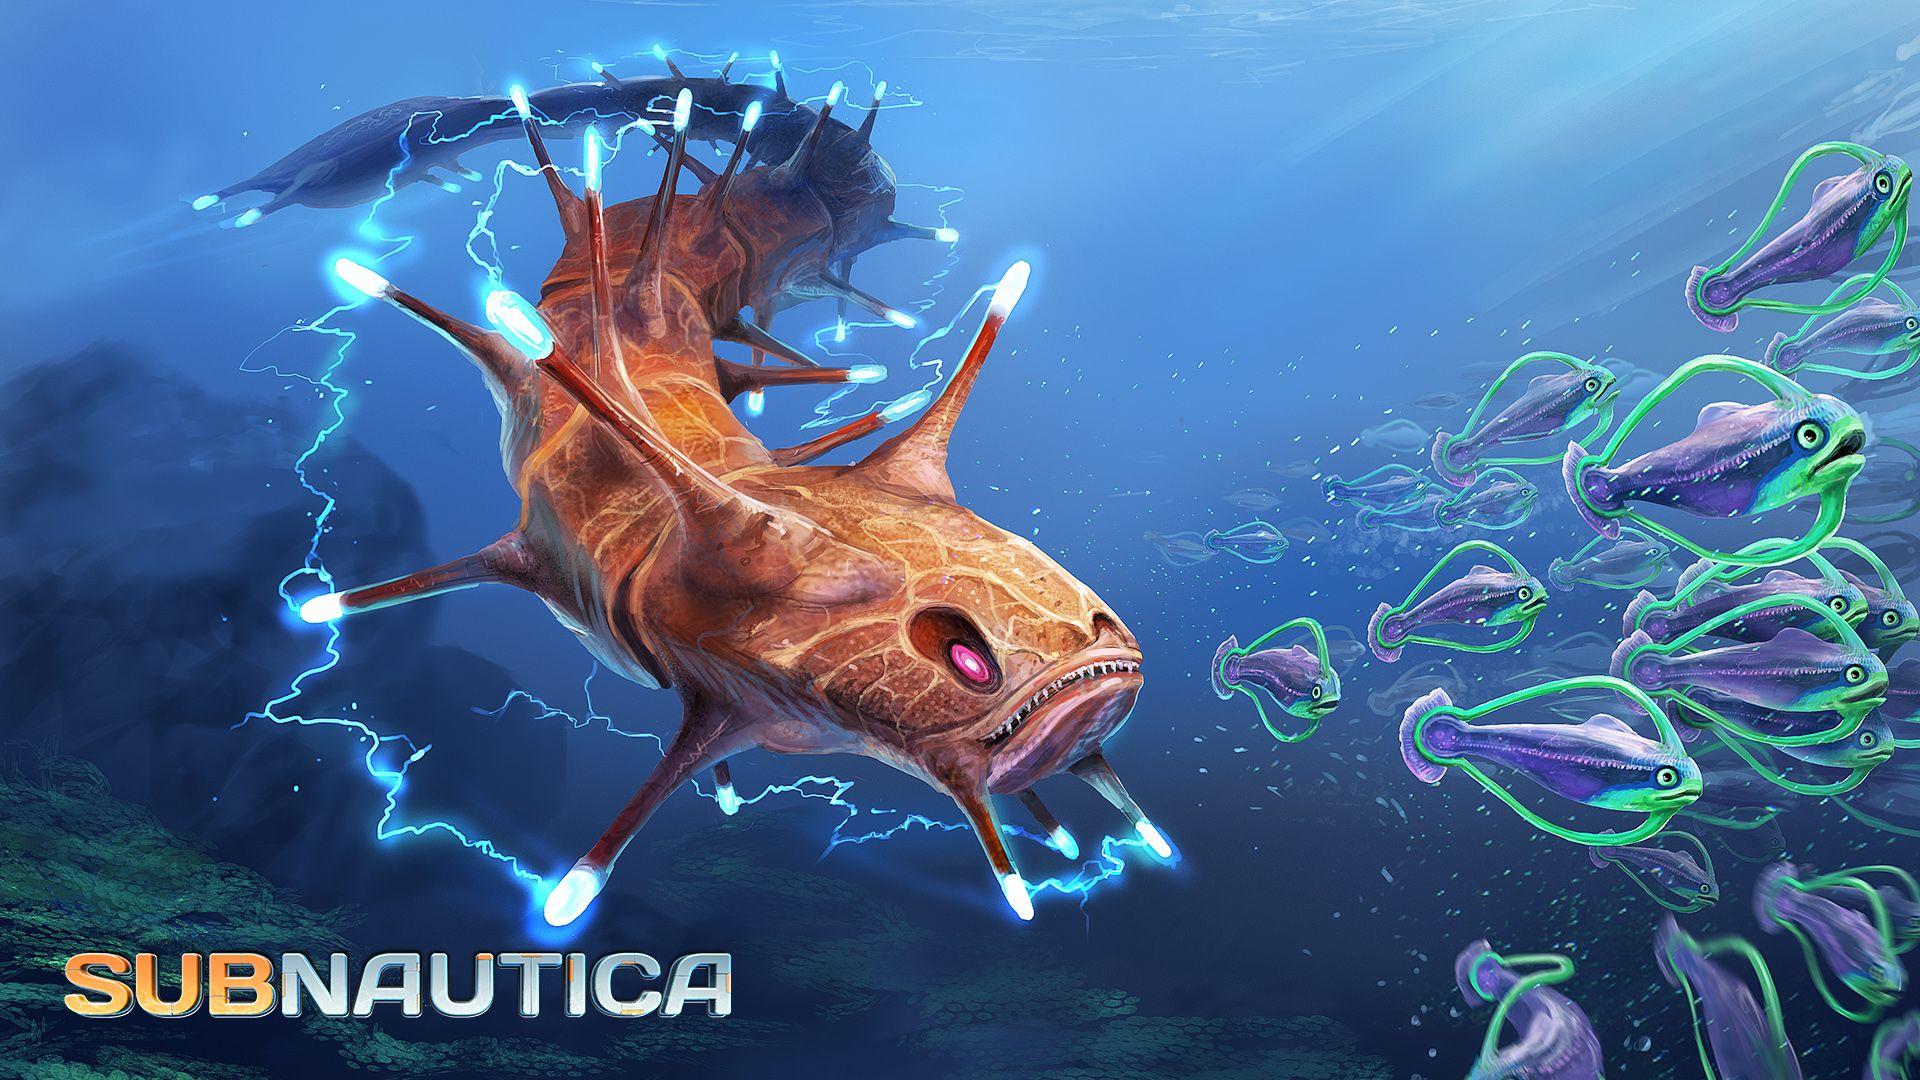 Subnautica Game Wallpapers - Wallpaper Cave